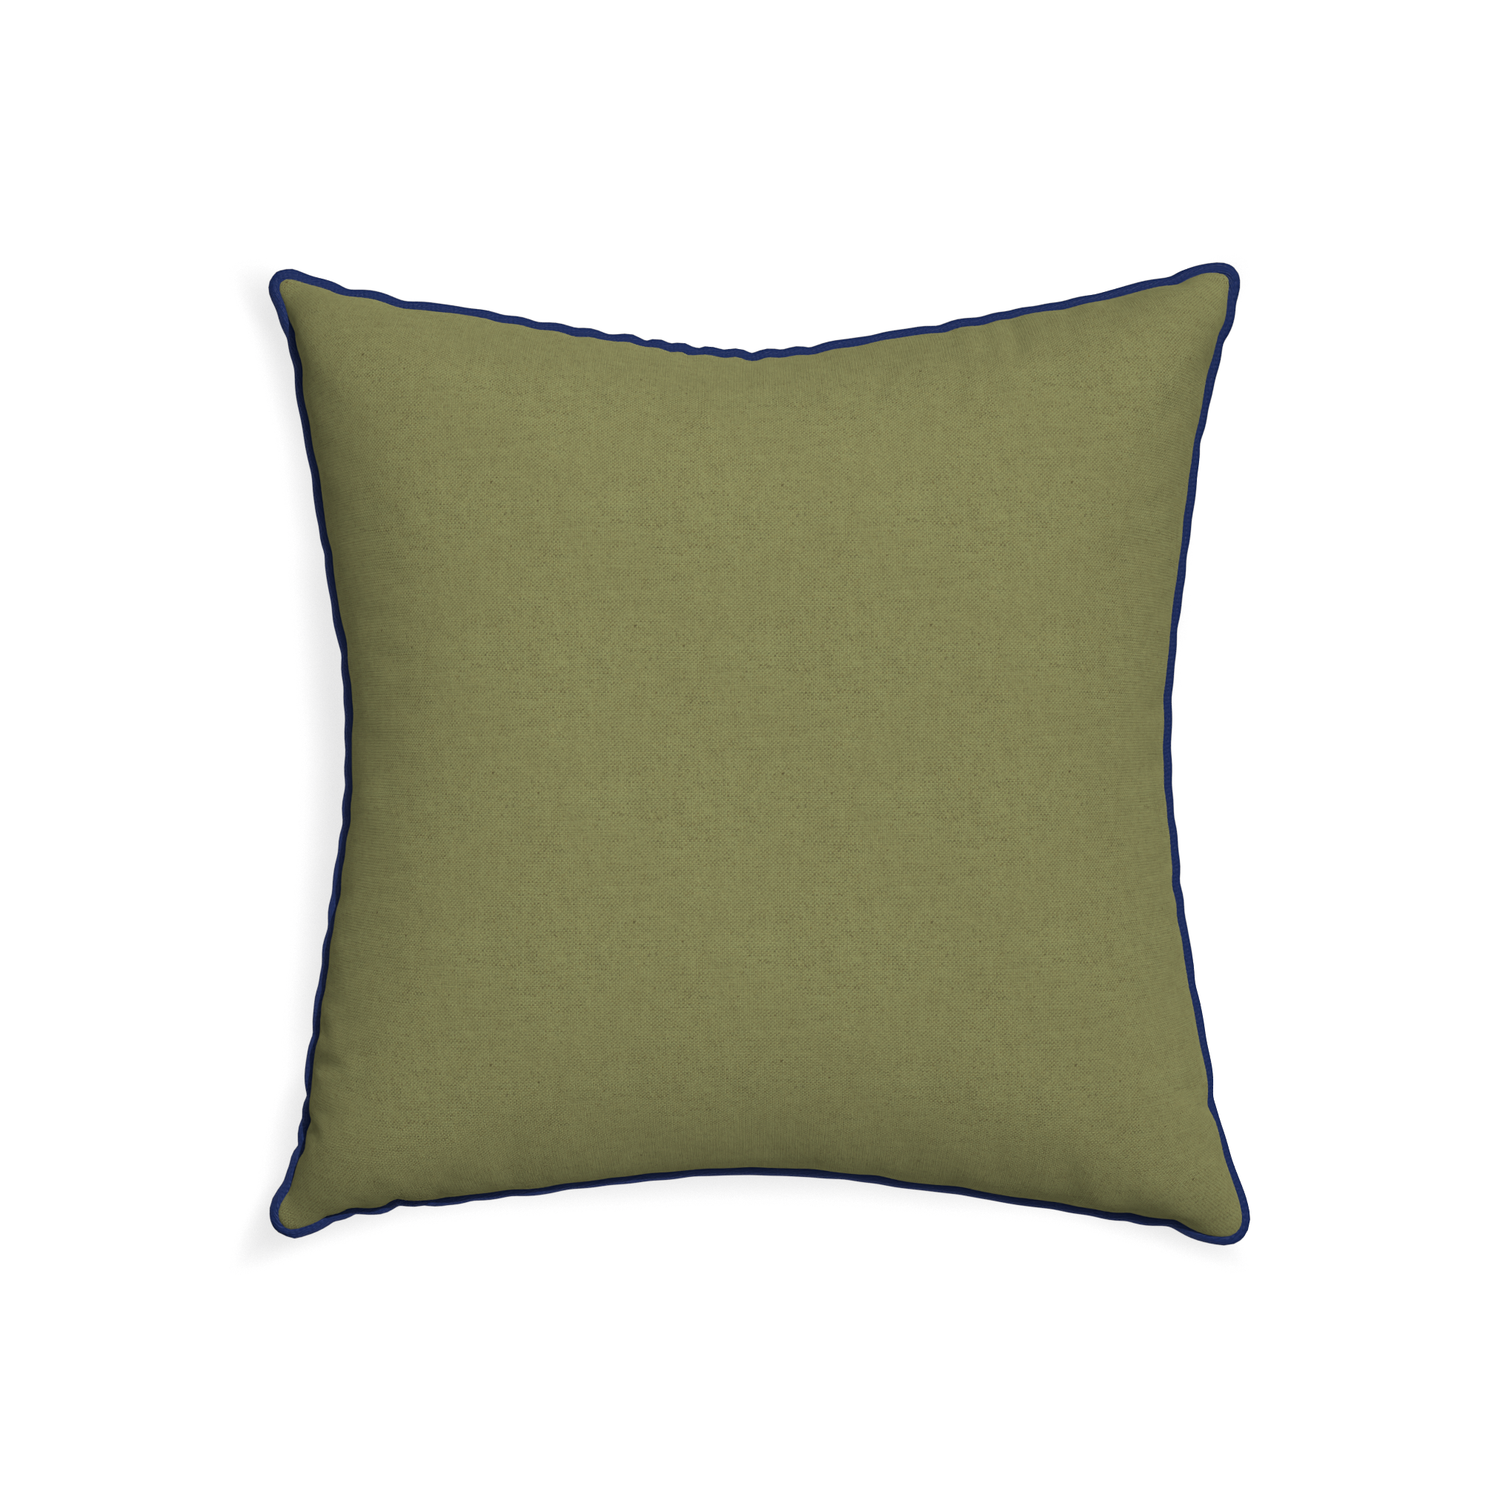 22-square moss custom moss greenpillow with midnight piping on white background